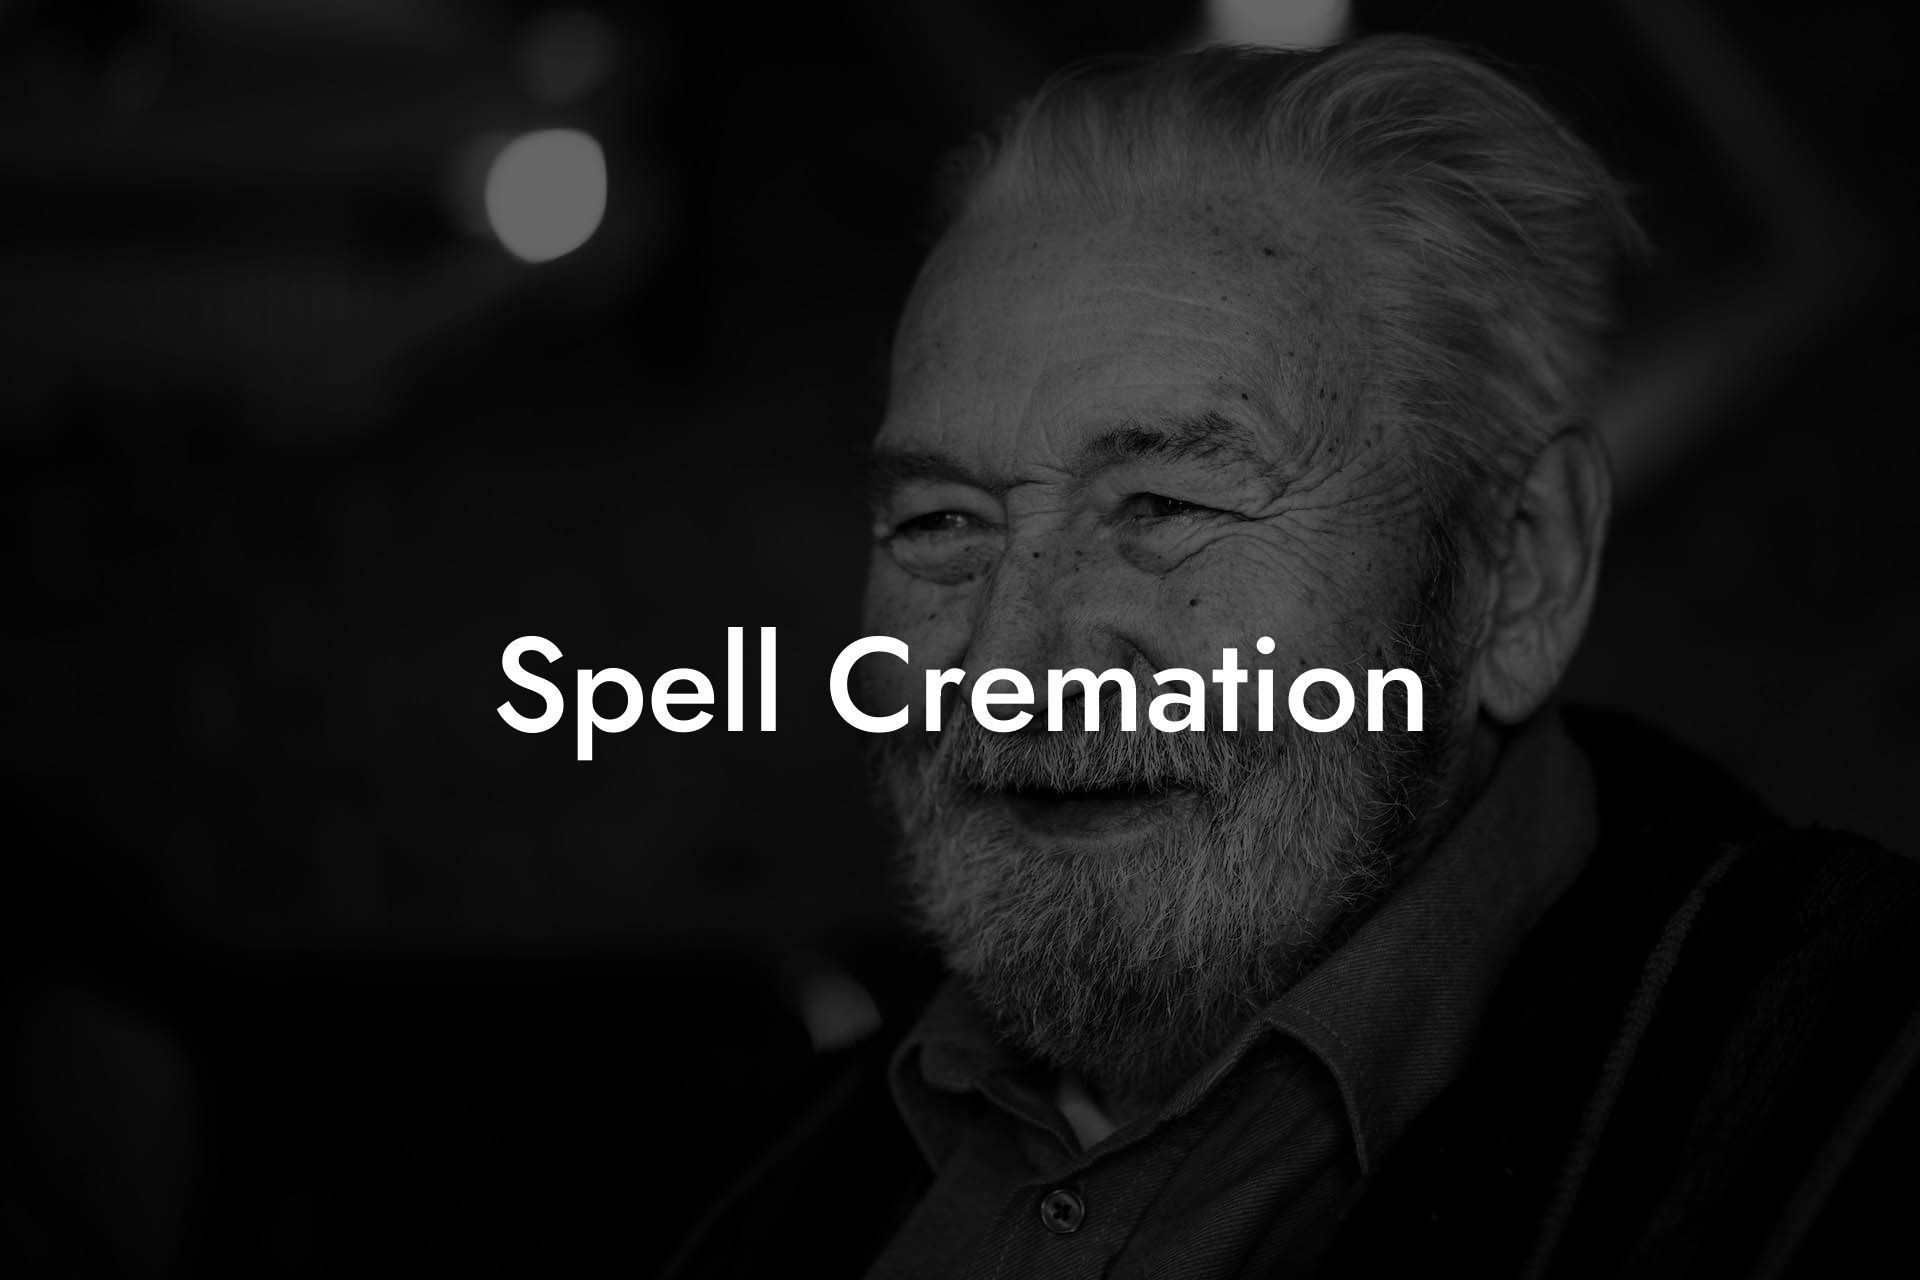 Spell Cremation